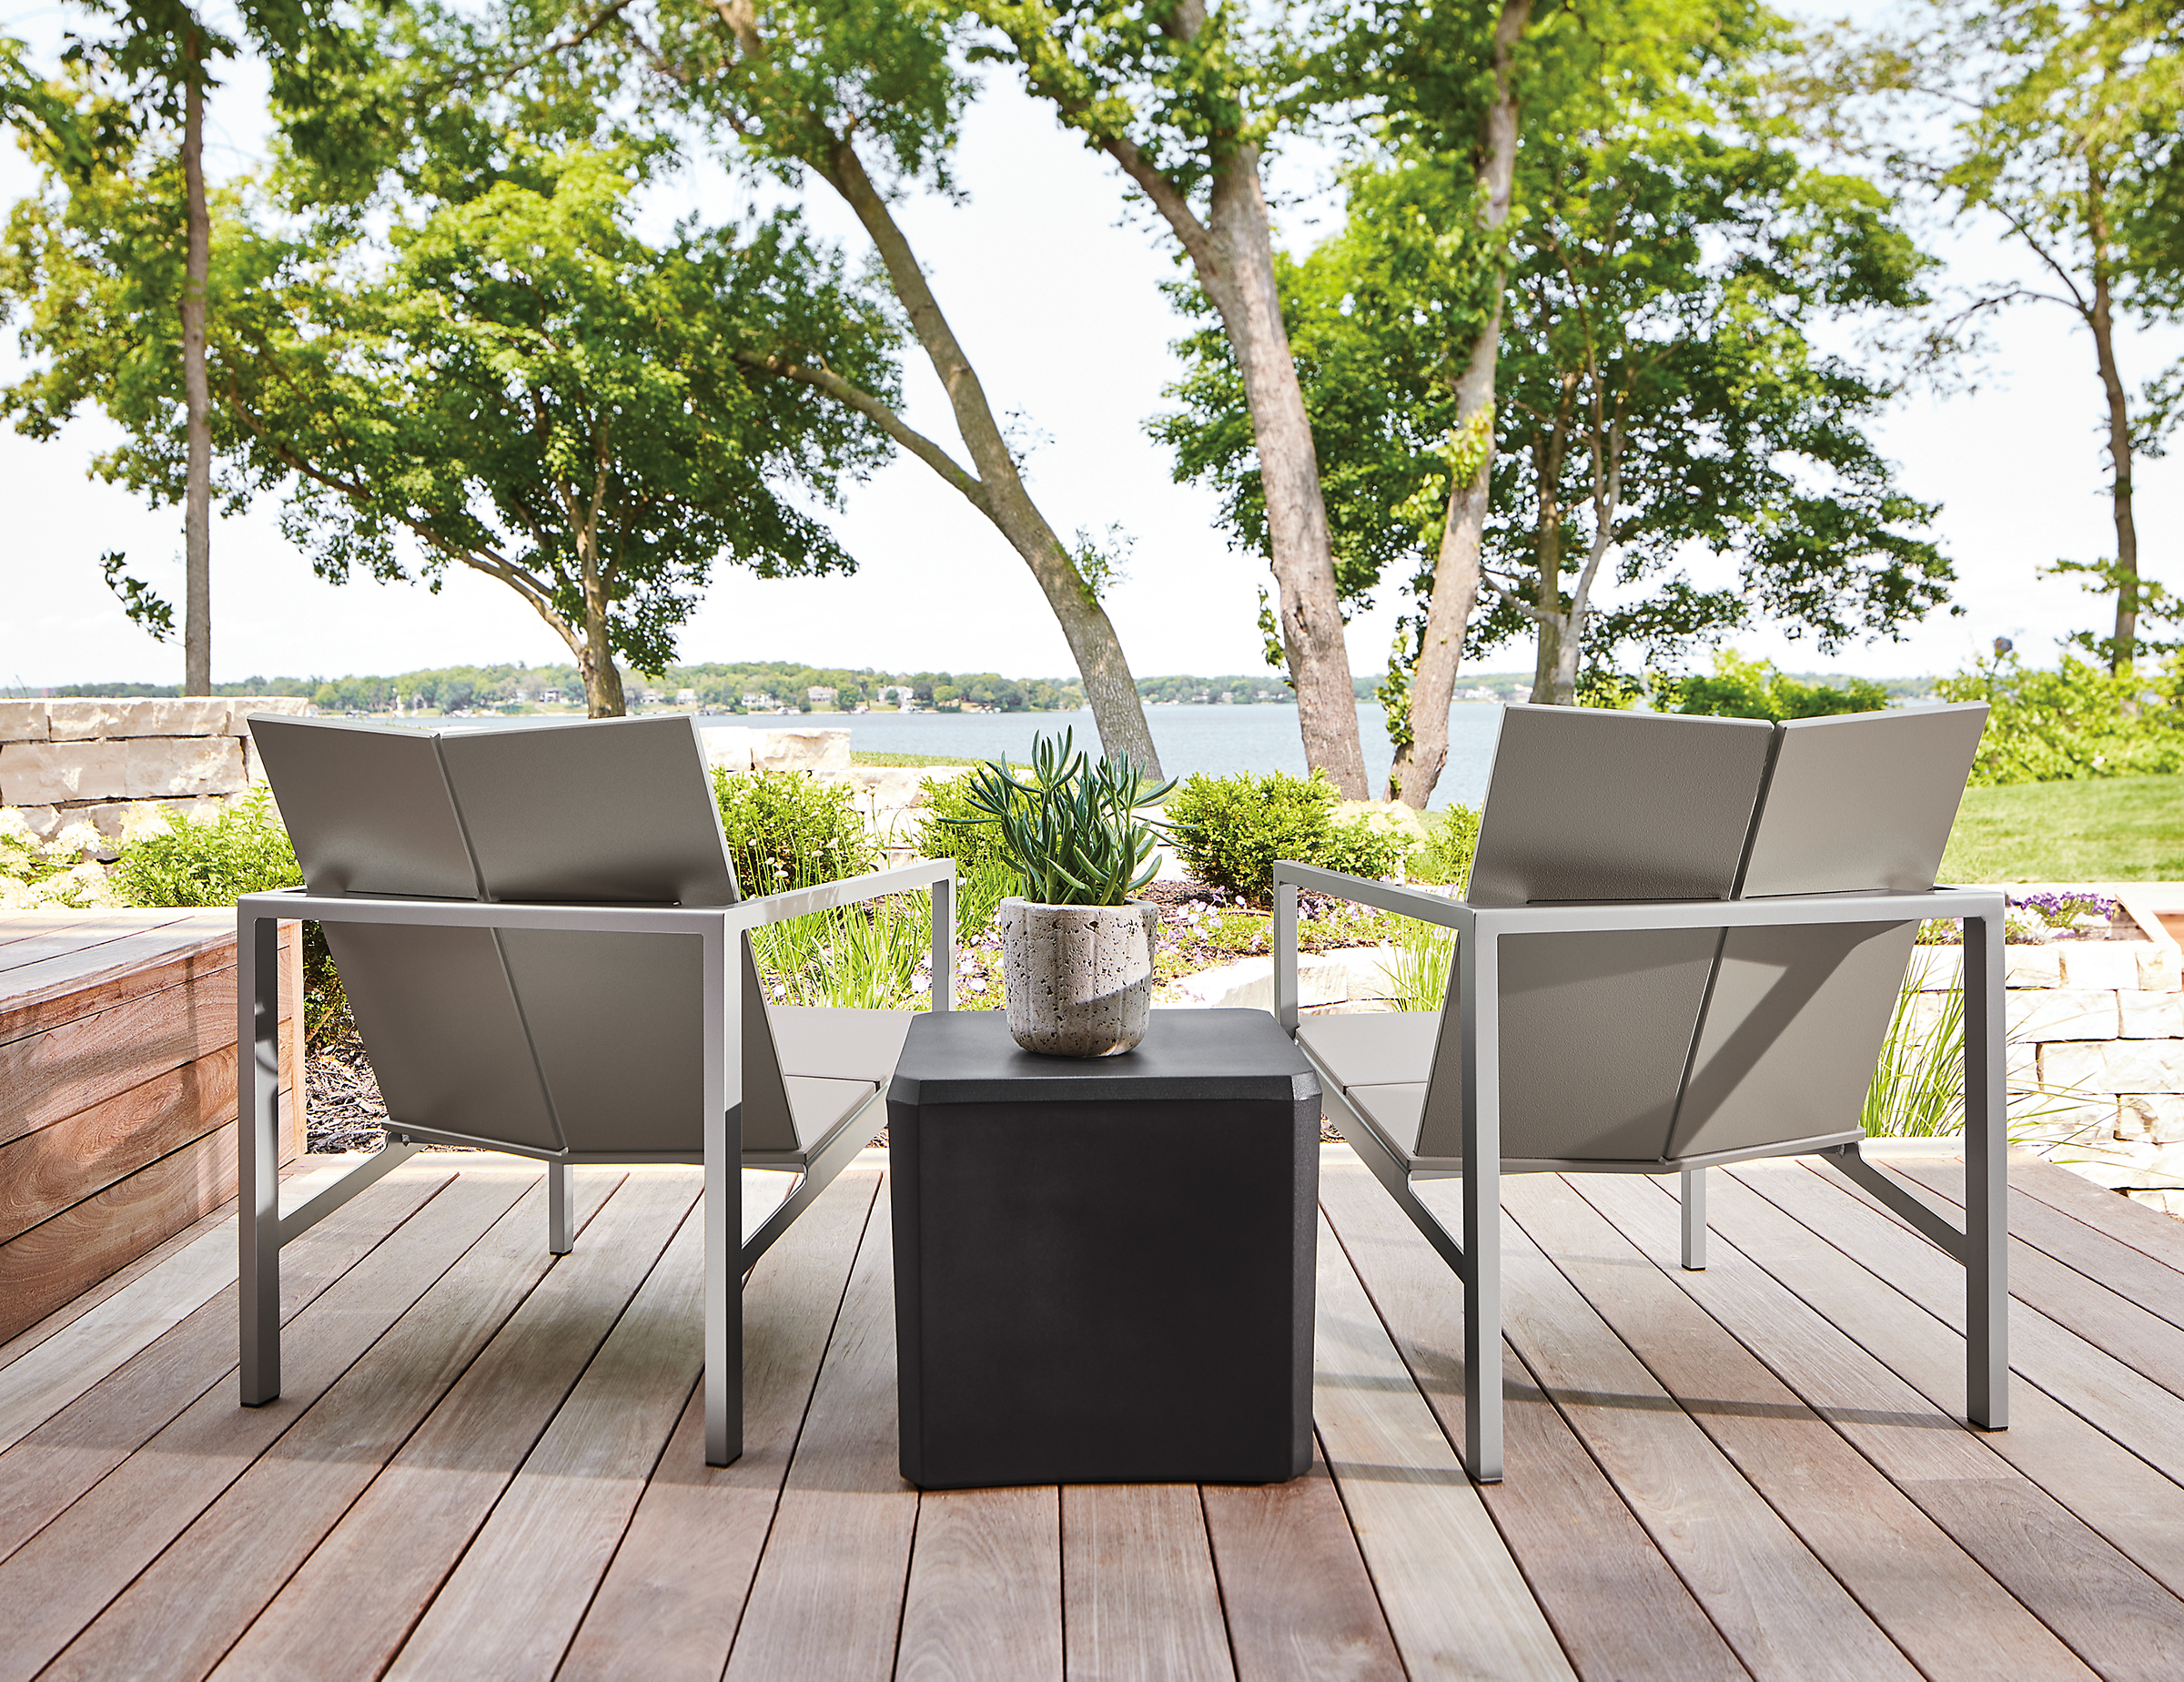 Outdoor deck with two mattix lounge chairs and a cusp square stool.